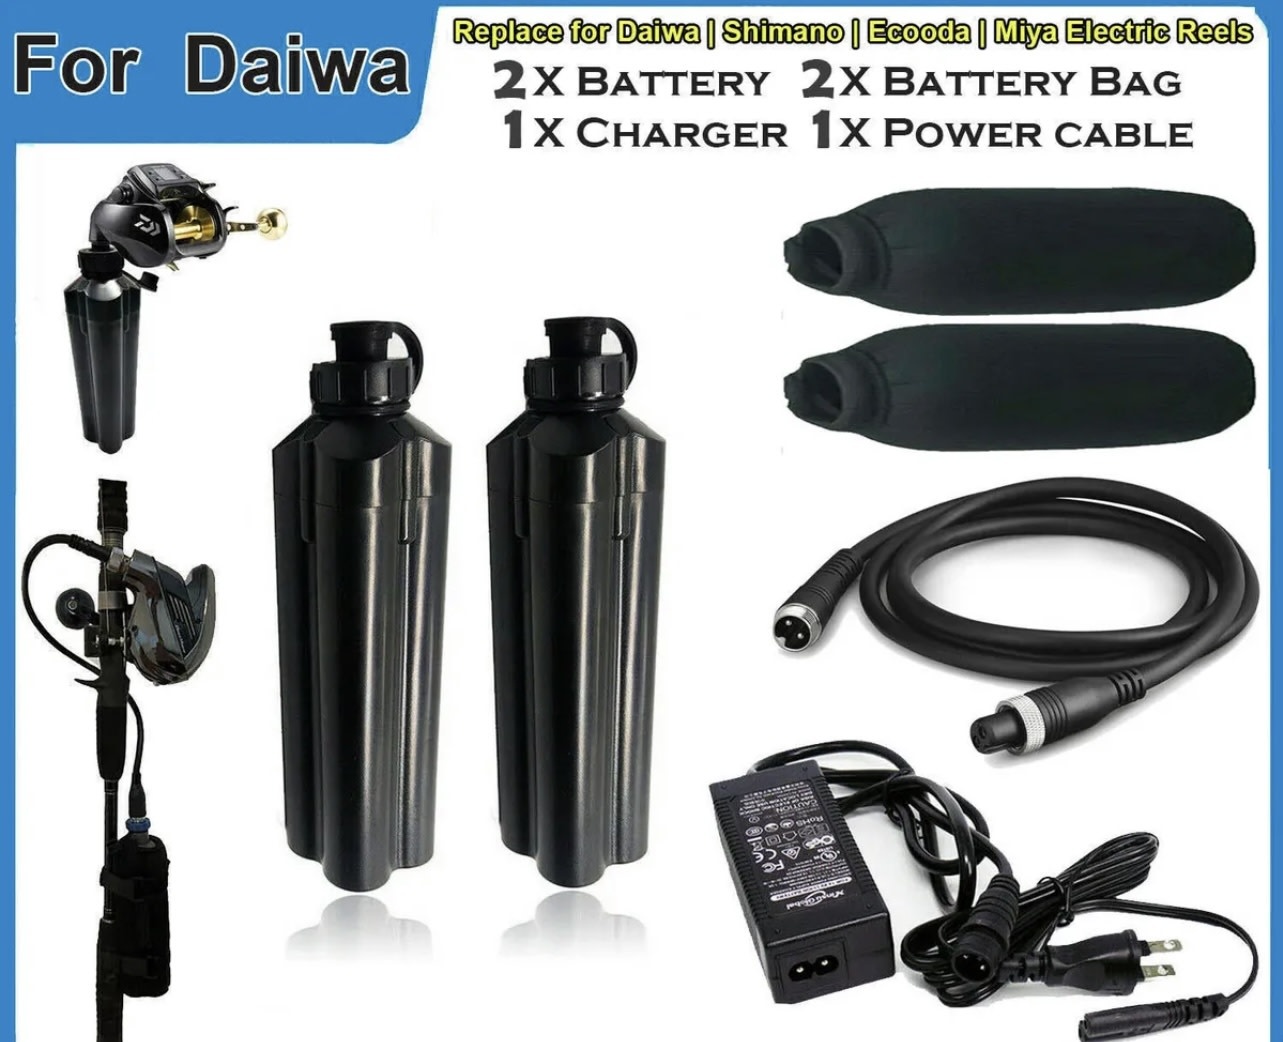 Lithium-ion Battery Tanacom 18Ah 14.8V 5000mAh Electric Reel Battery 2pk w/battery  bag, cable, Charger Kit in Bag - Angler's Choice Tackle